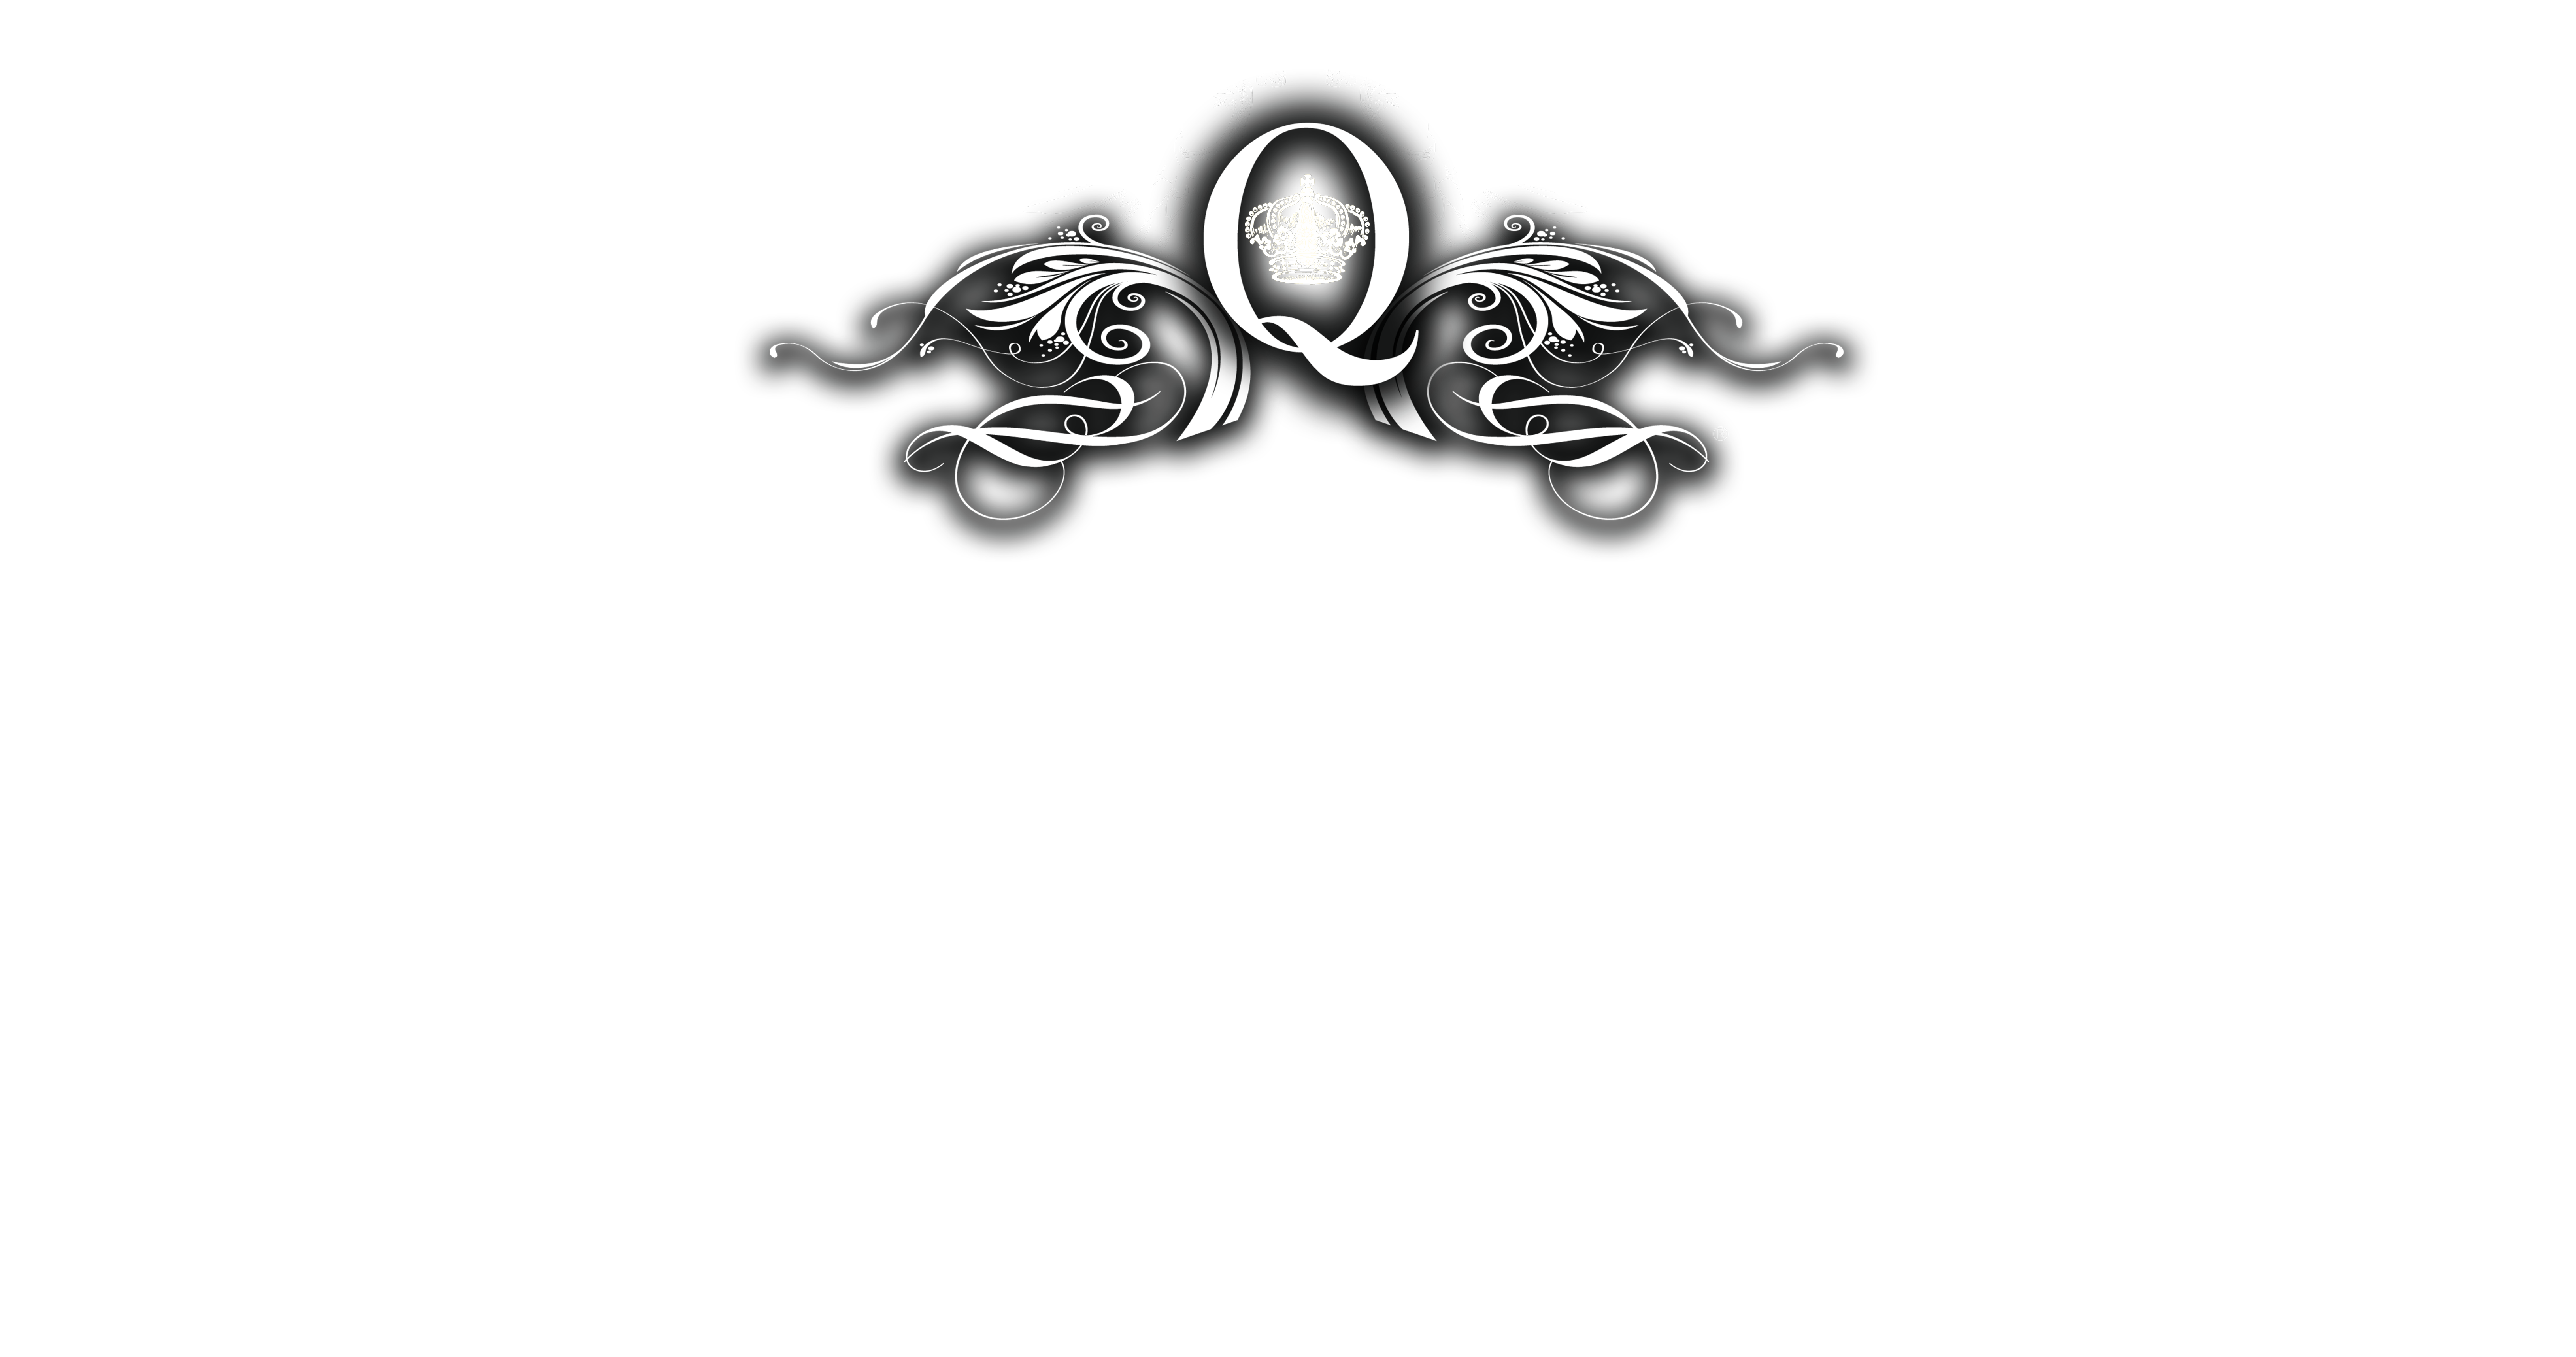 Queen at the opera - Logo